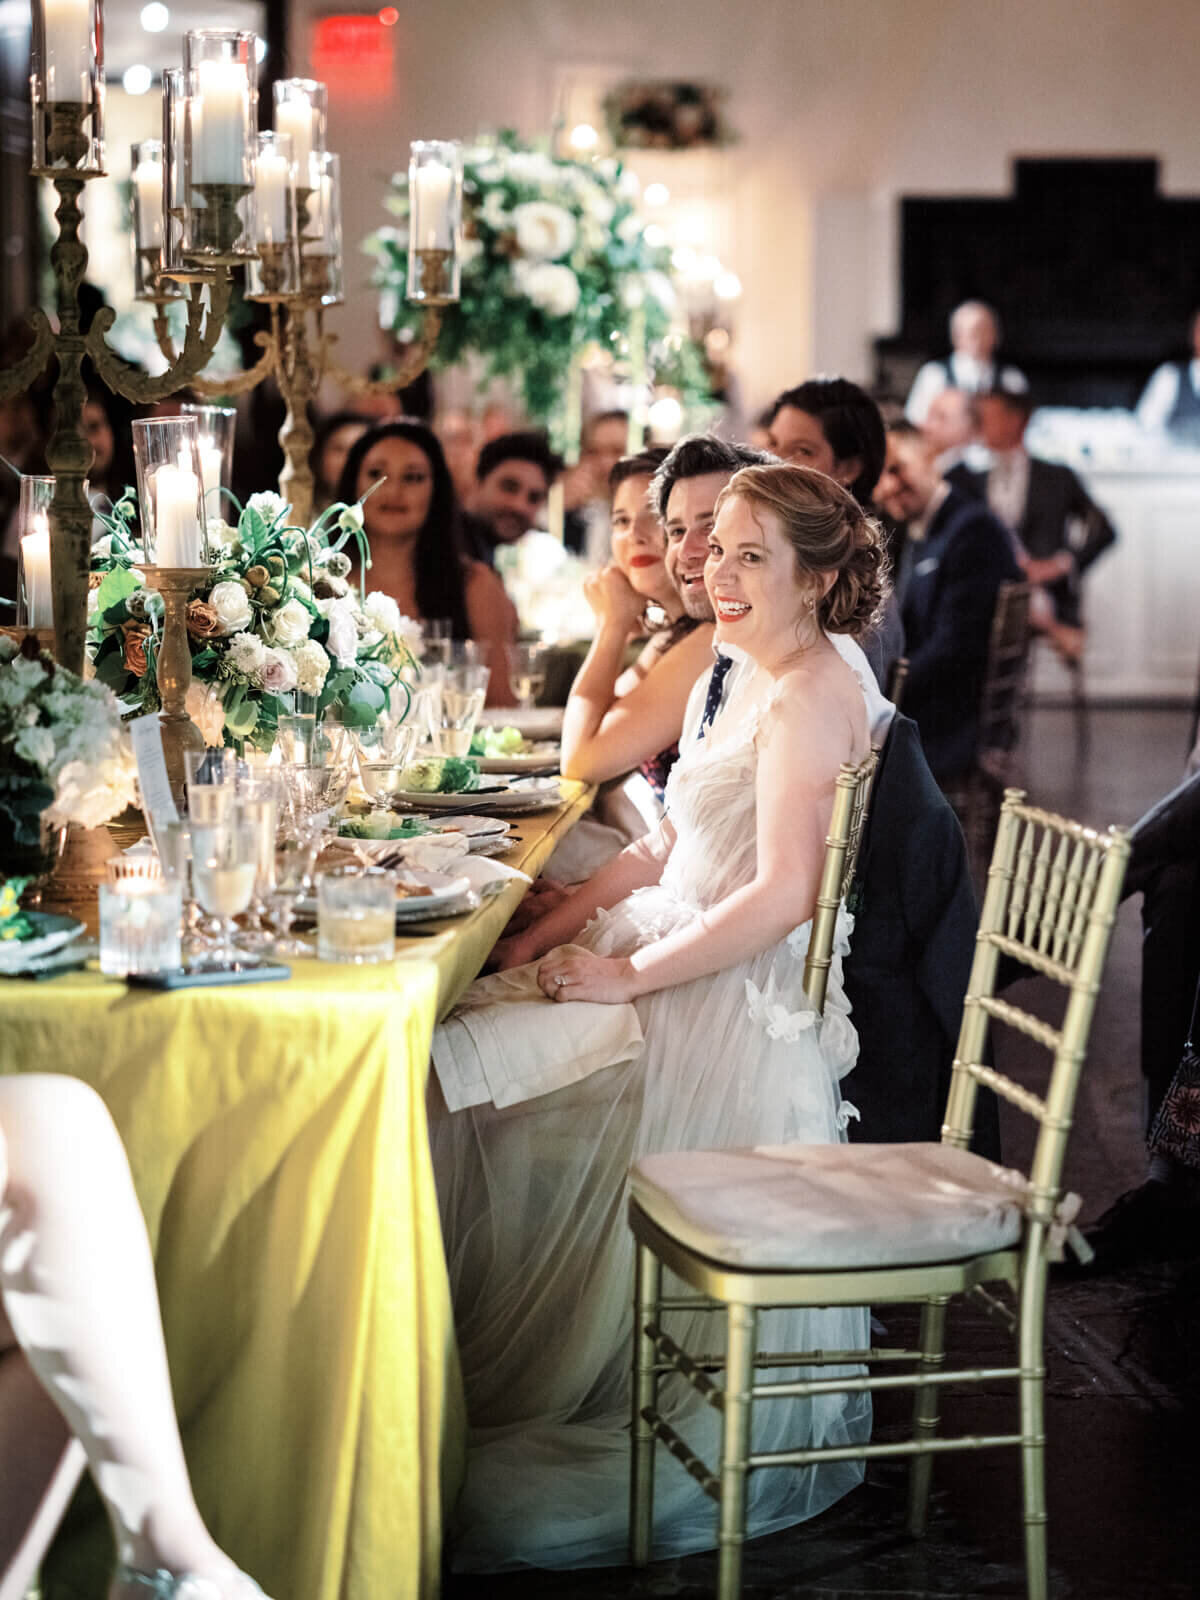 The bride is smiling with the guests while seated at a long dining table filled with flower and candle centerpieces.